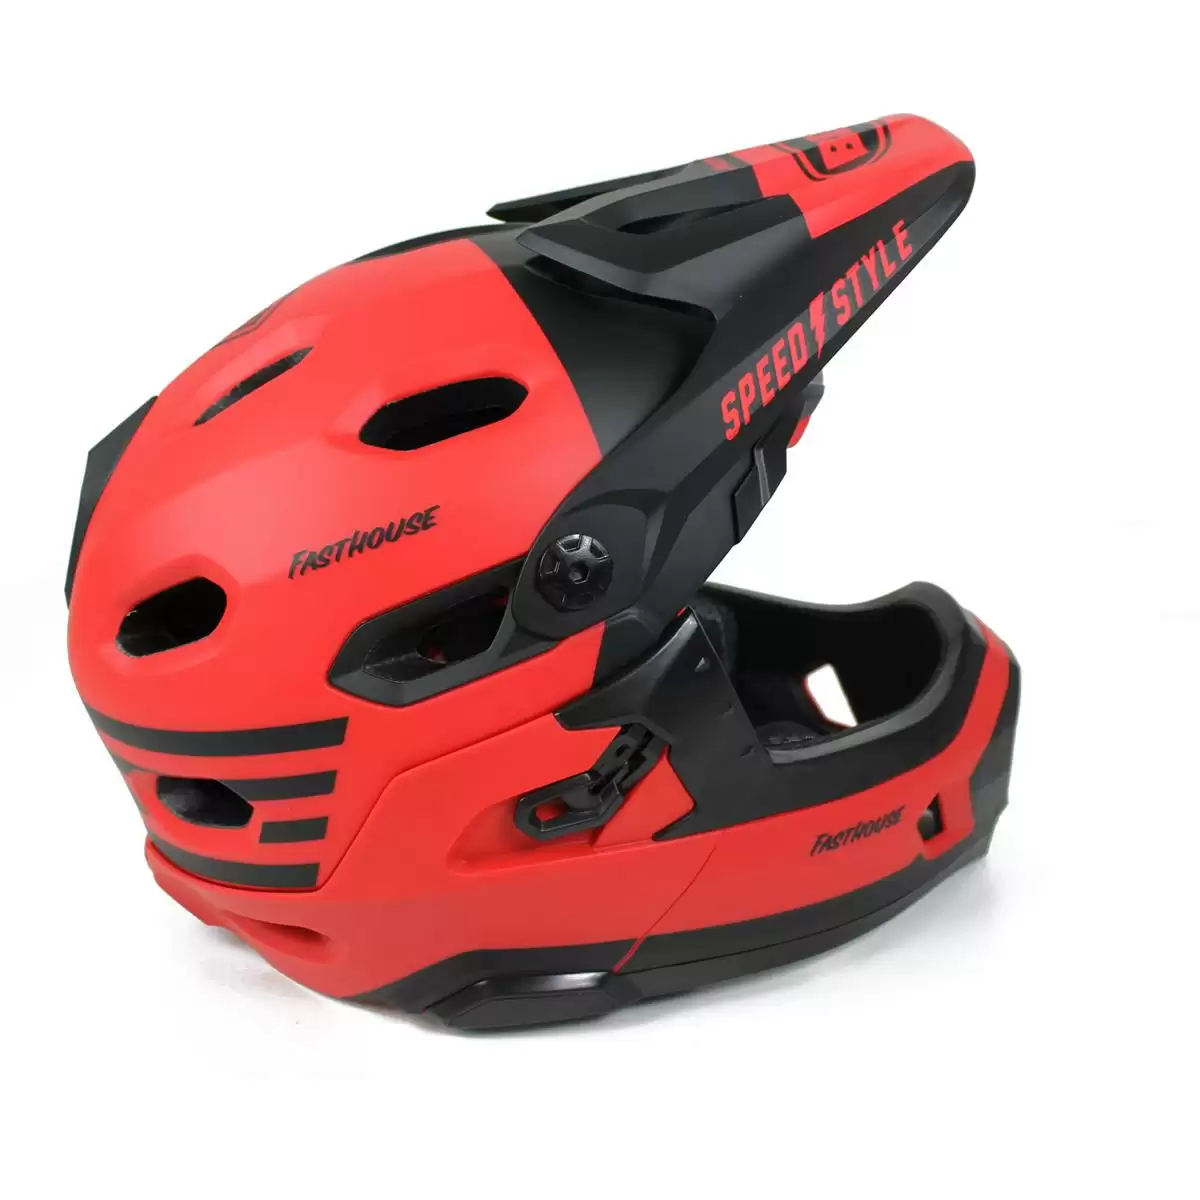 Helm Super DH MIPS Fasthouse Rot Größe S (52-56cm) #3